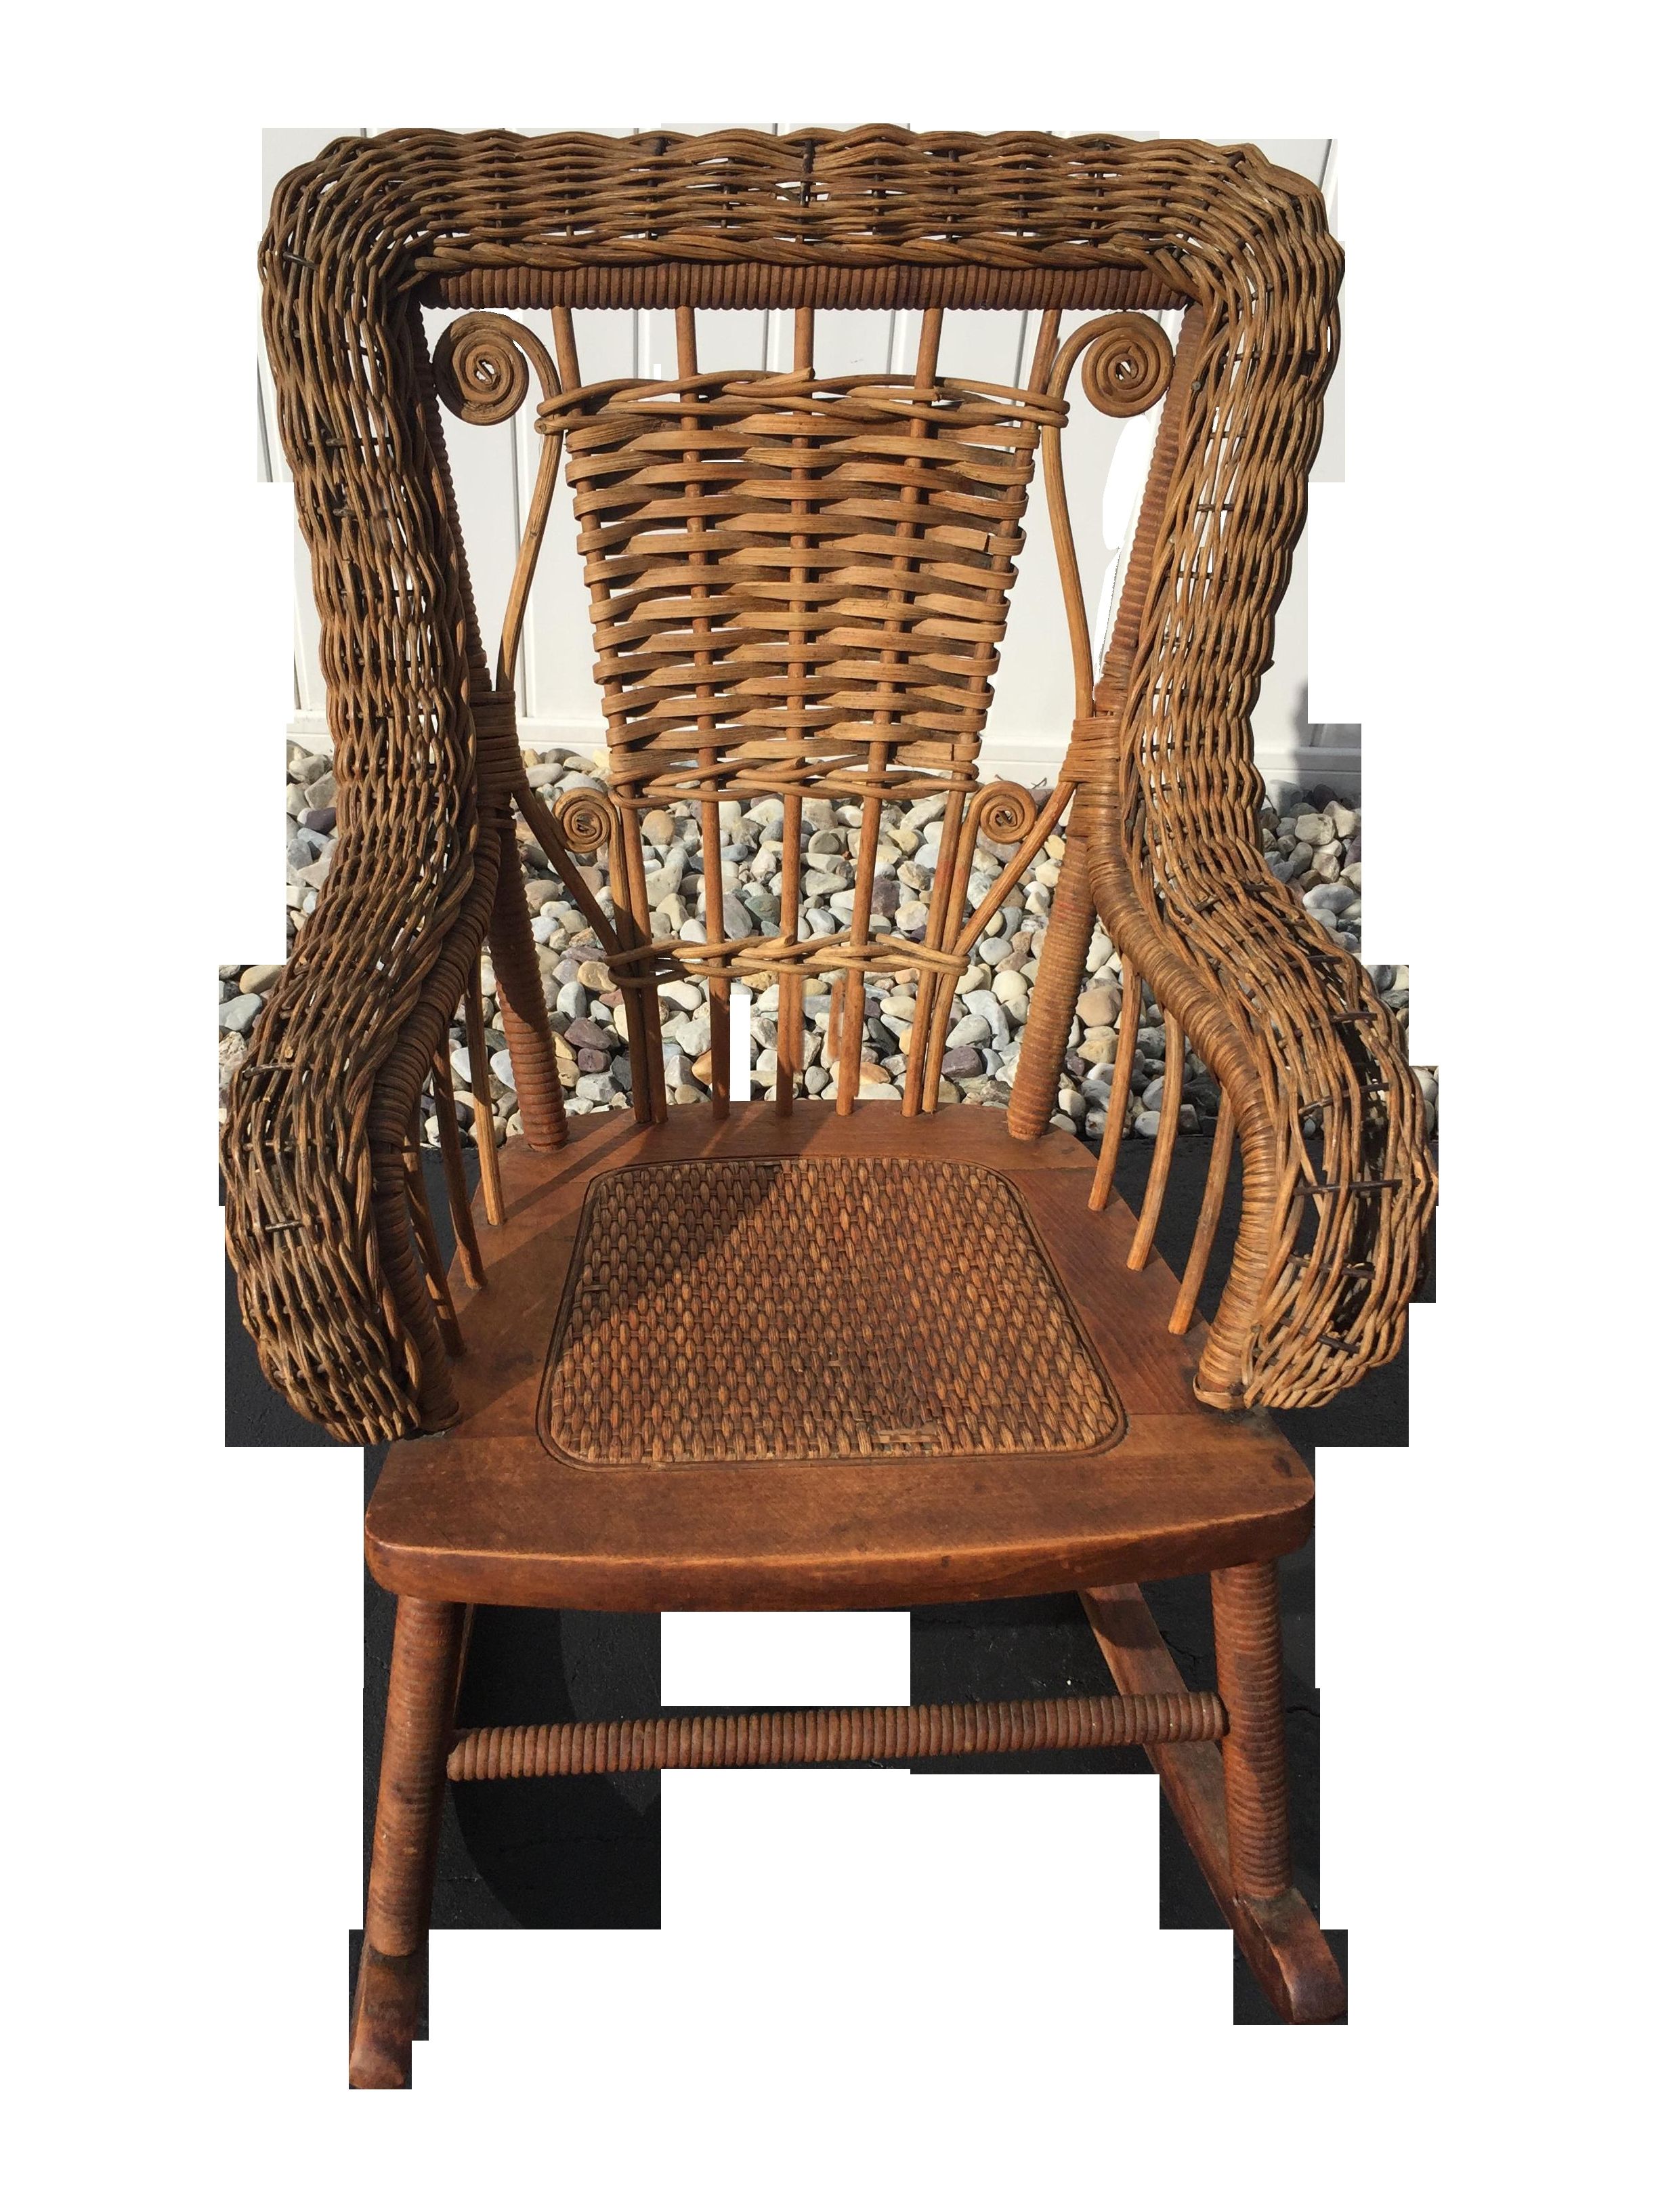 Antique Wicker Rocking Chairs For Current Antique Wicker Furniture Awesome Antique Wicker Rocking Chair Best (View 14 of 20)